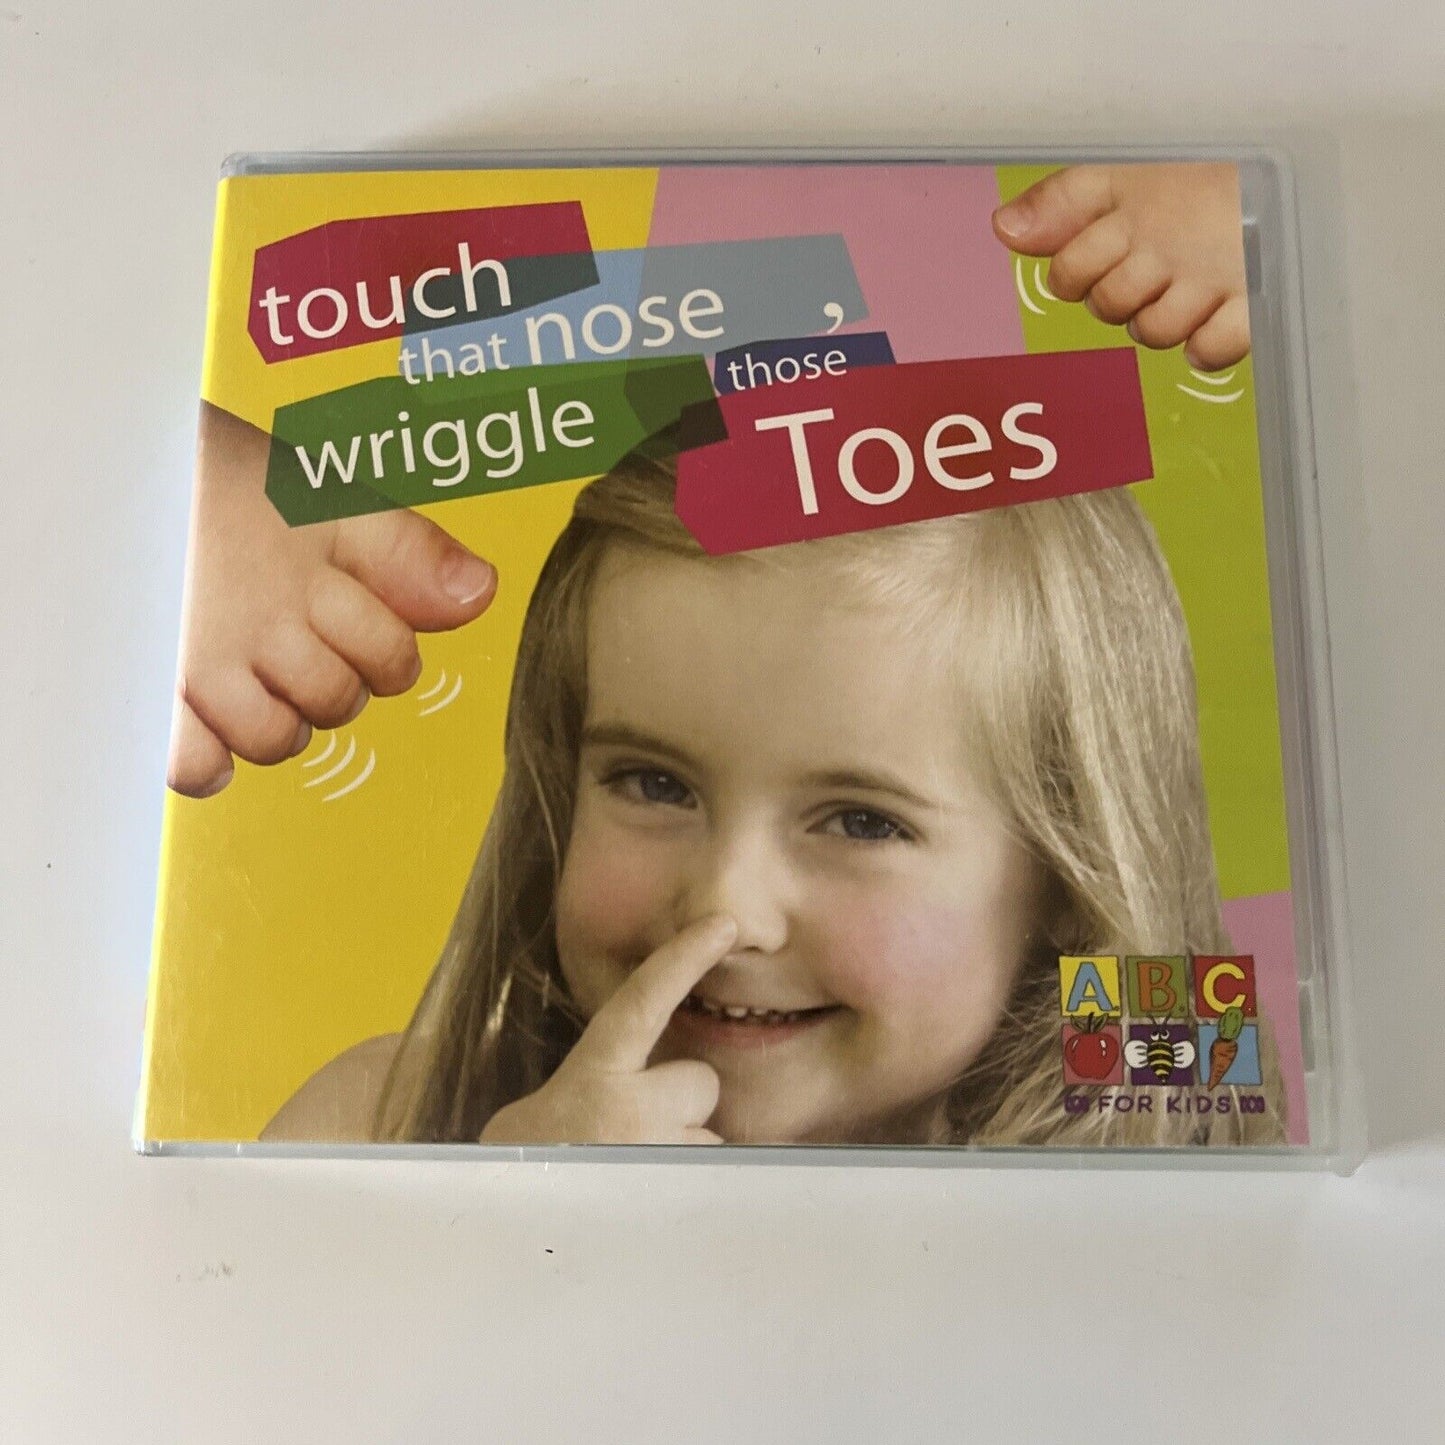 Touch That Nose, Wriggle Those Toes - ABC For Kids (CD, 2007)